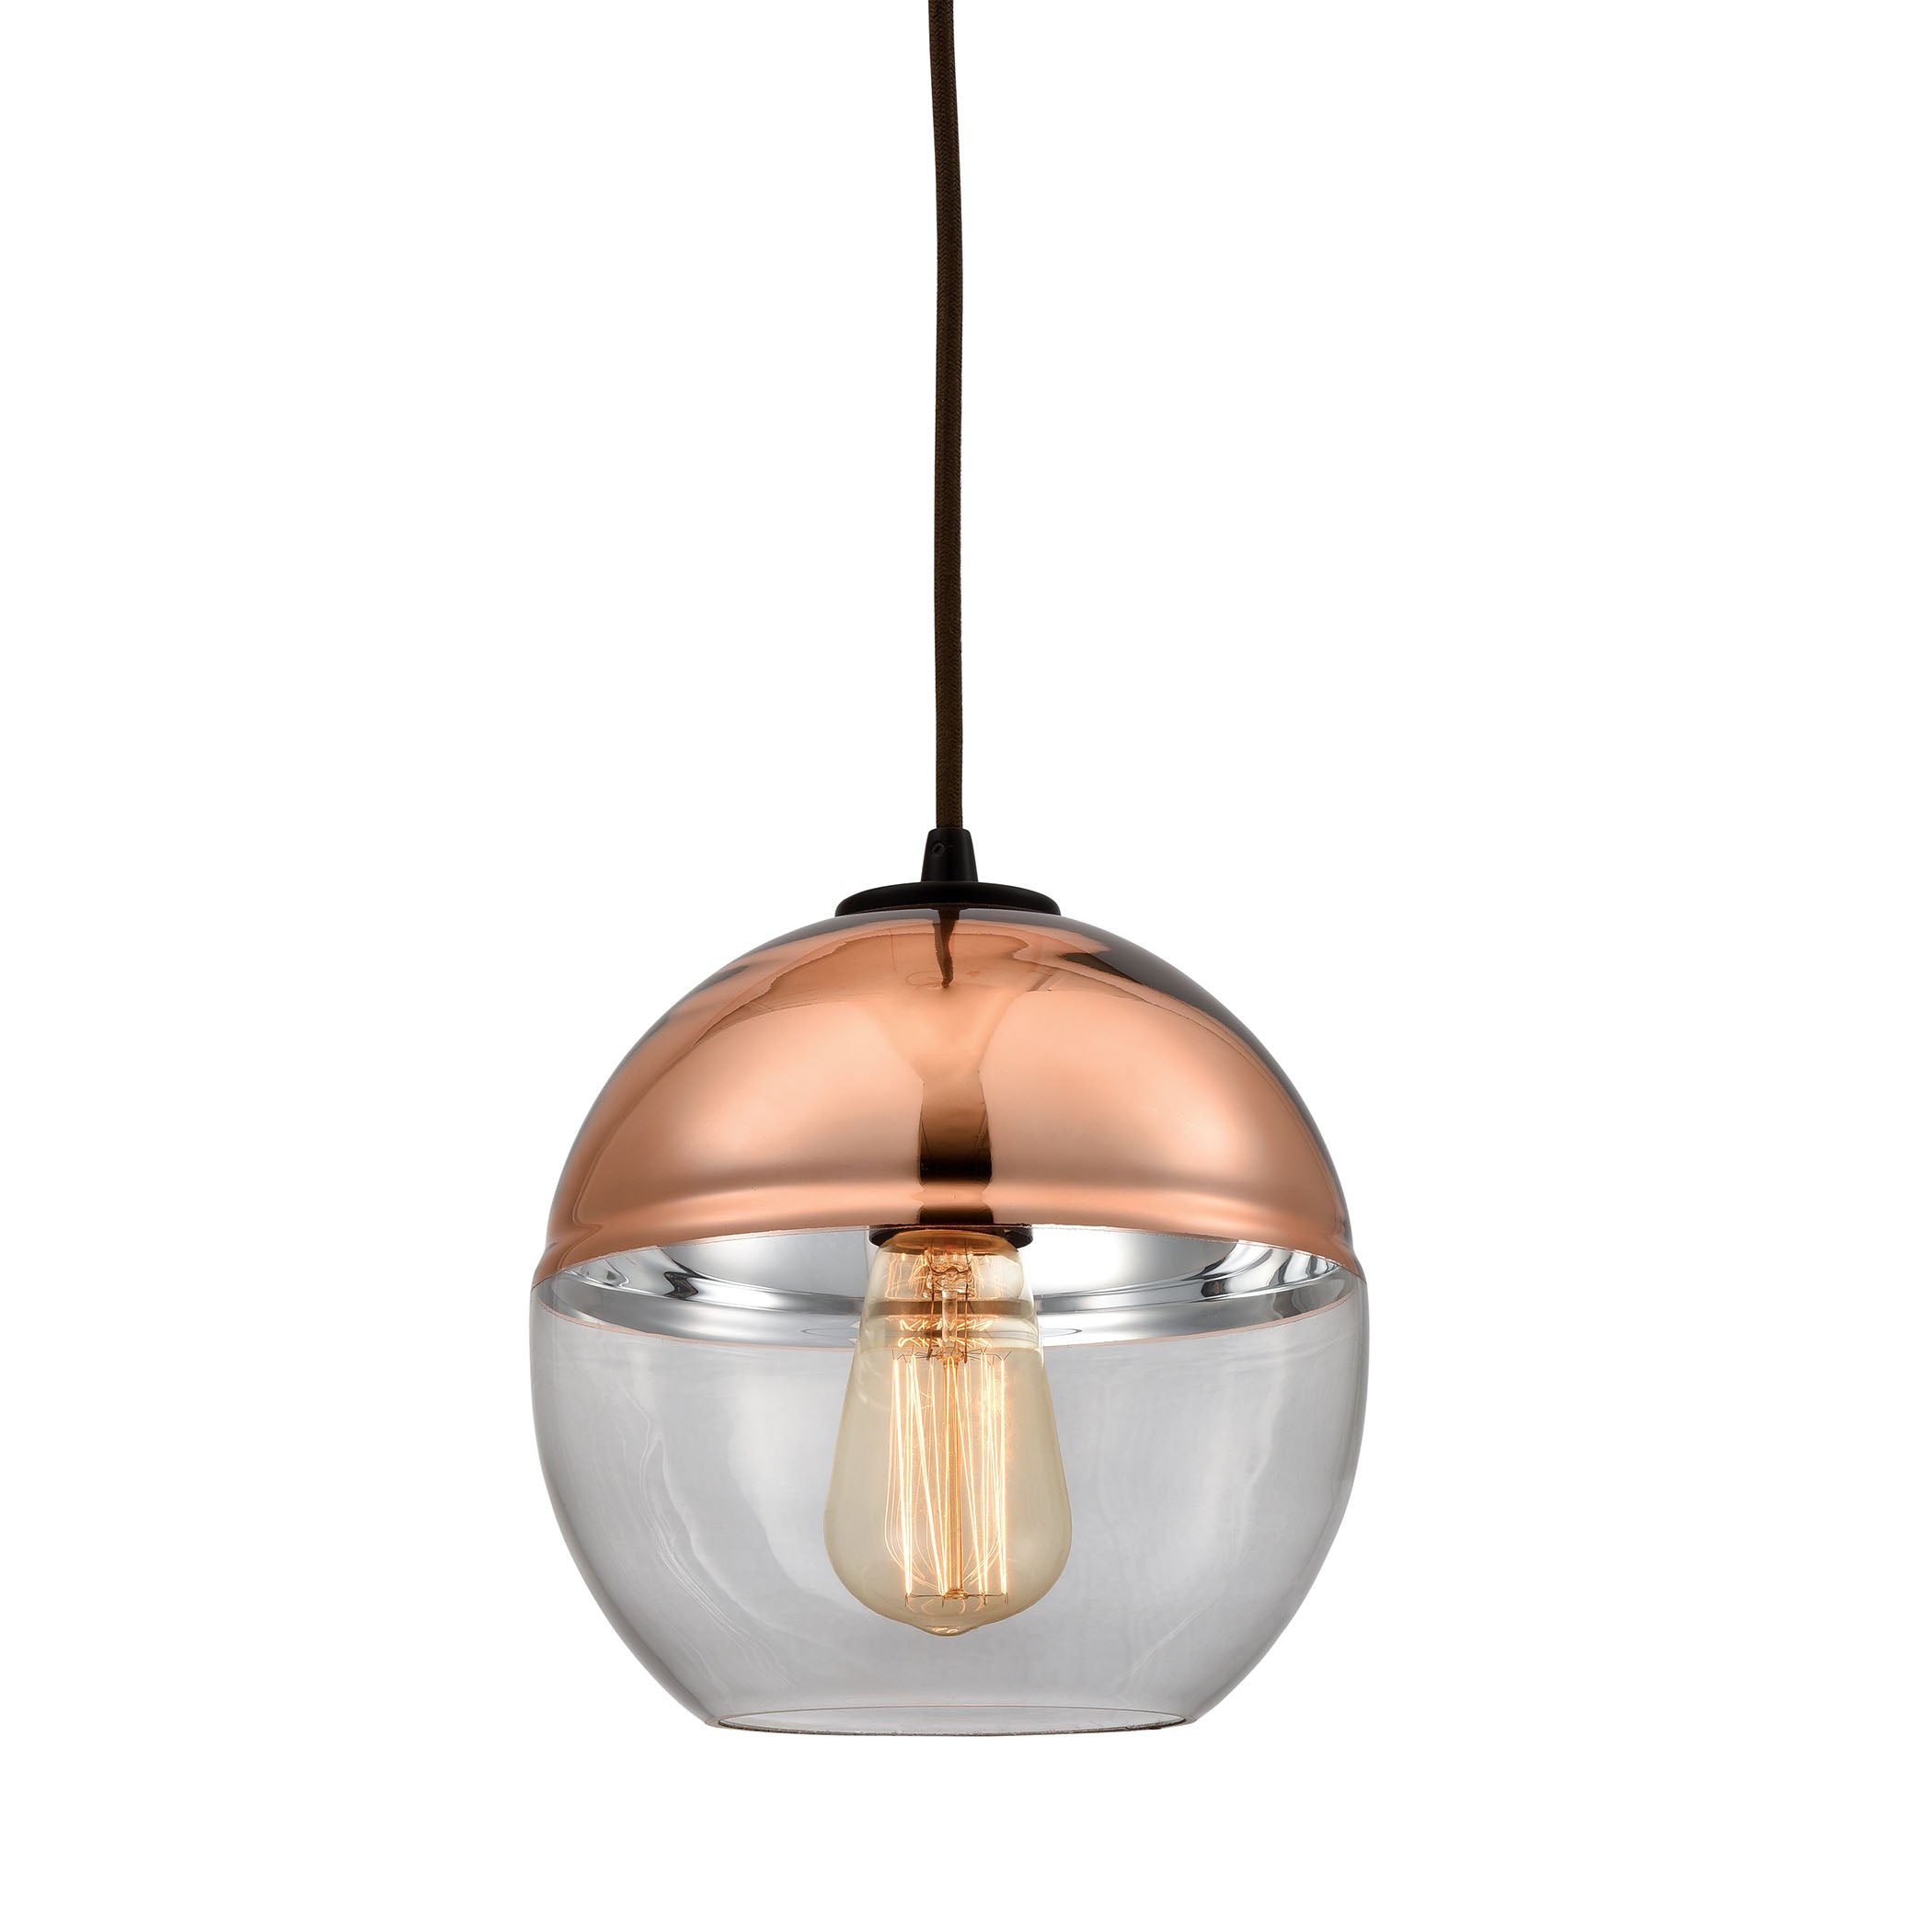 ELK Lighting 10490/1 Revelo 1-Light Mini Pendant in Oil Rubbed Bronze with Clear and Copper-plated Glass